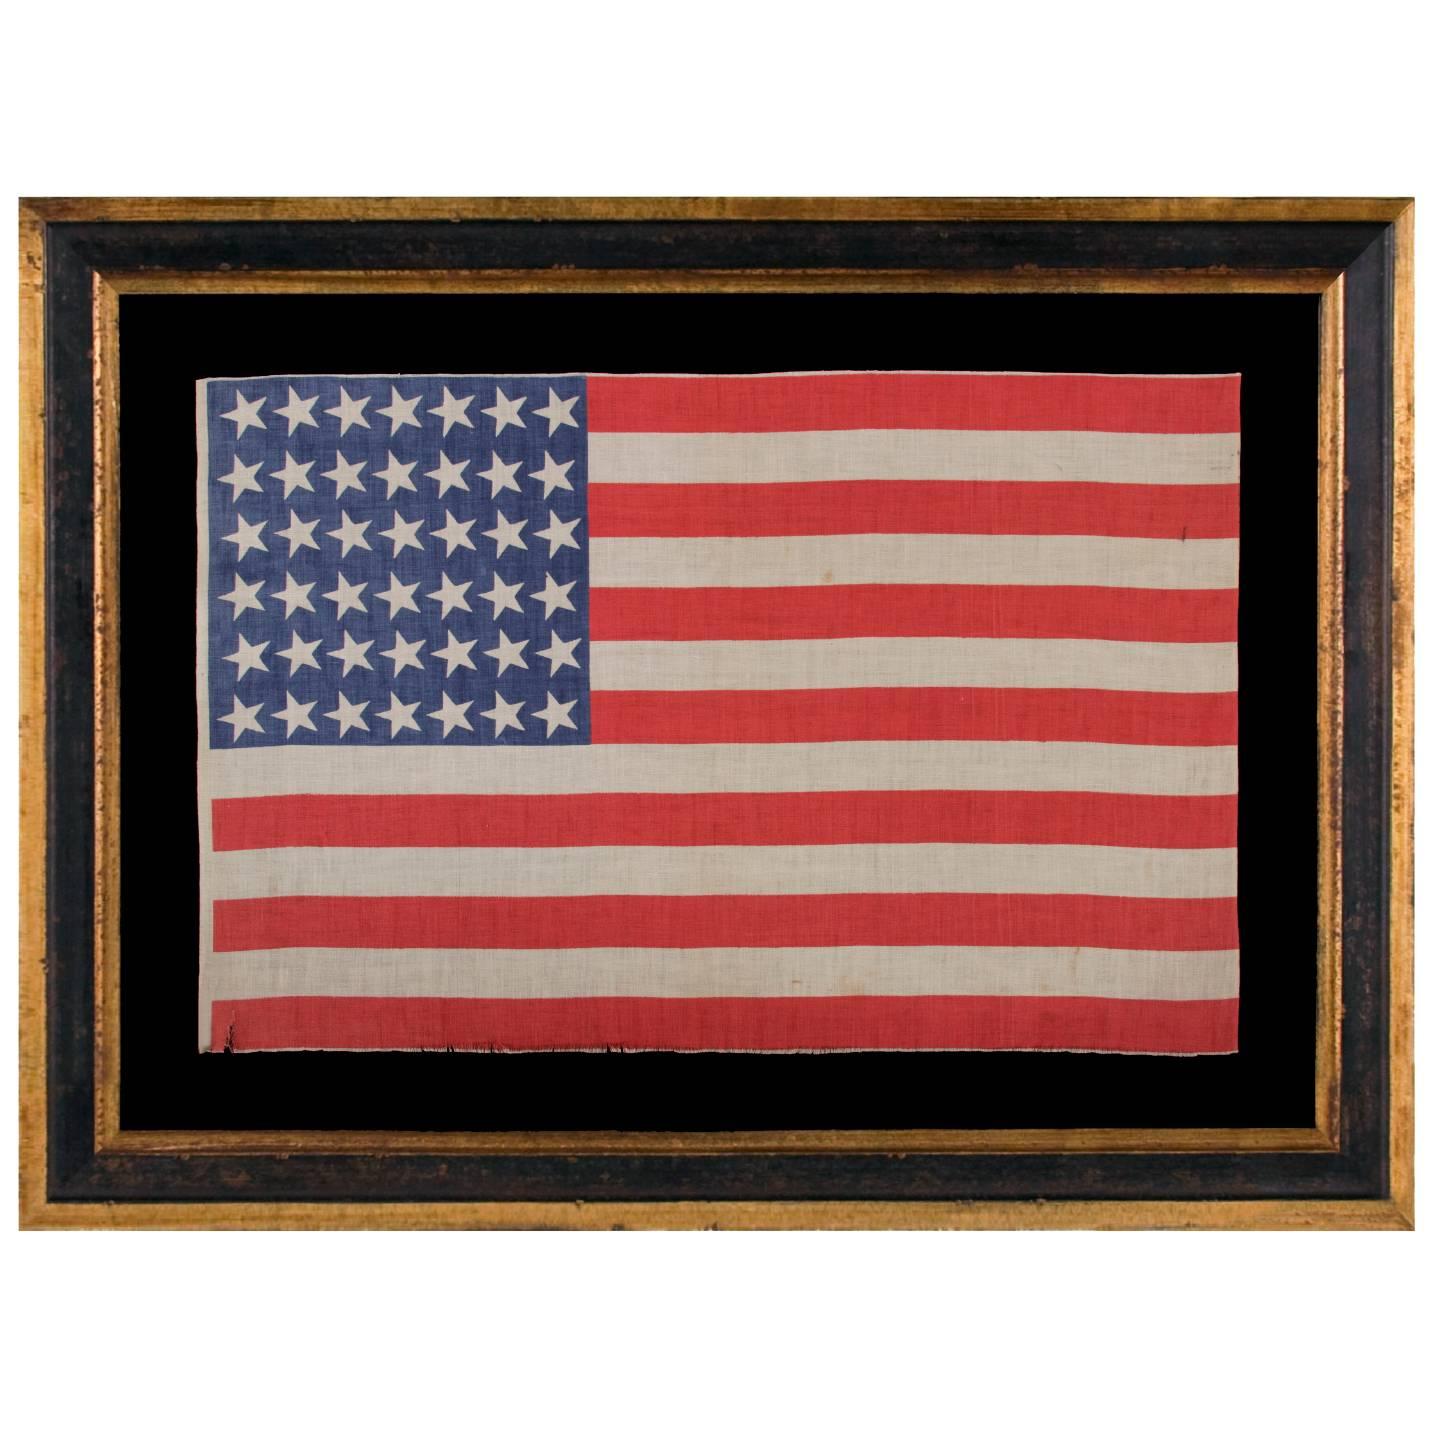 42 Star, American Parade Flag with Canted Stars